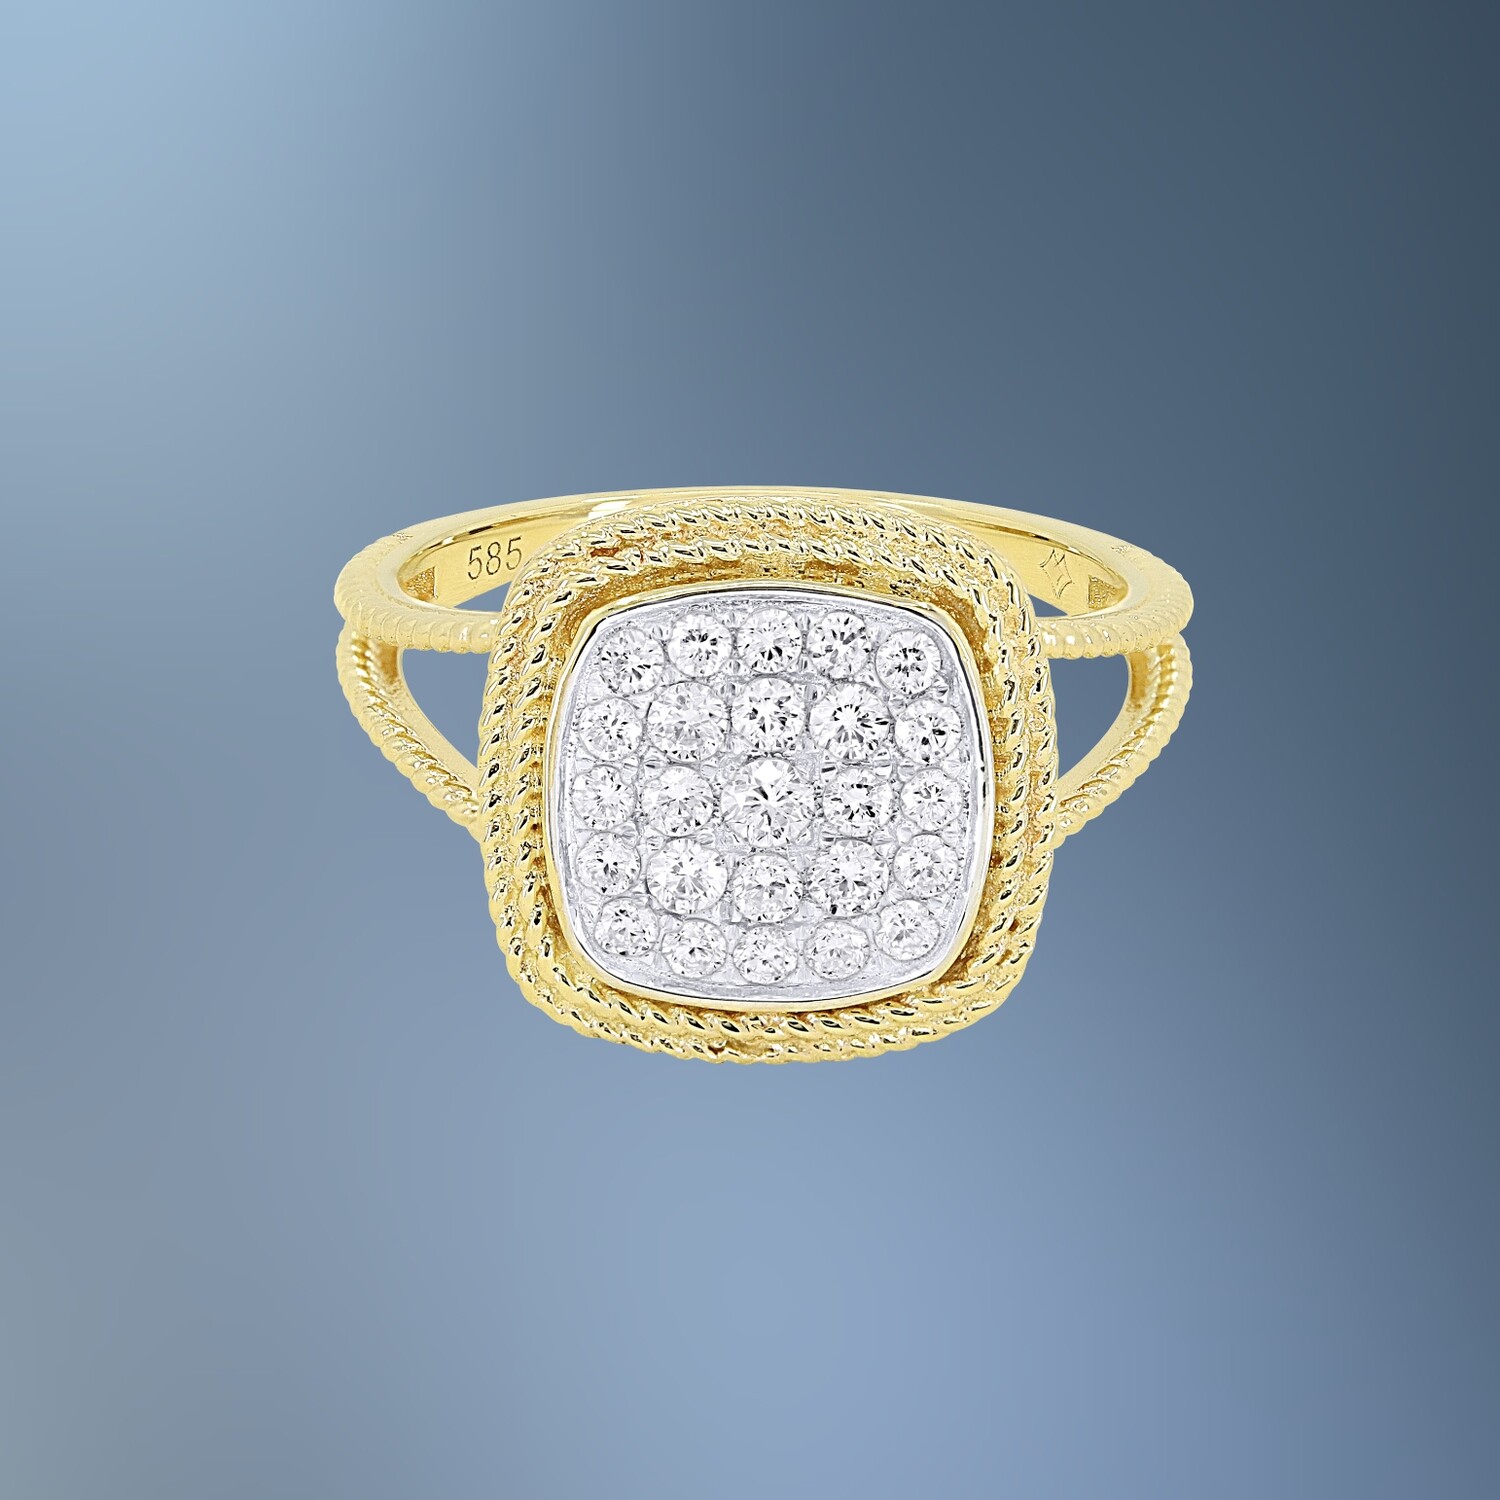 14KT YELLOW GOLD DIAMOND RING FEATURING 25 ROUND BRILLIANT CUT DIAMONDS TOTALING .45CTS